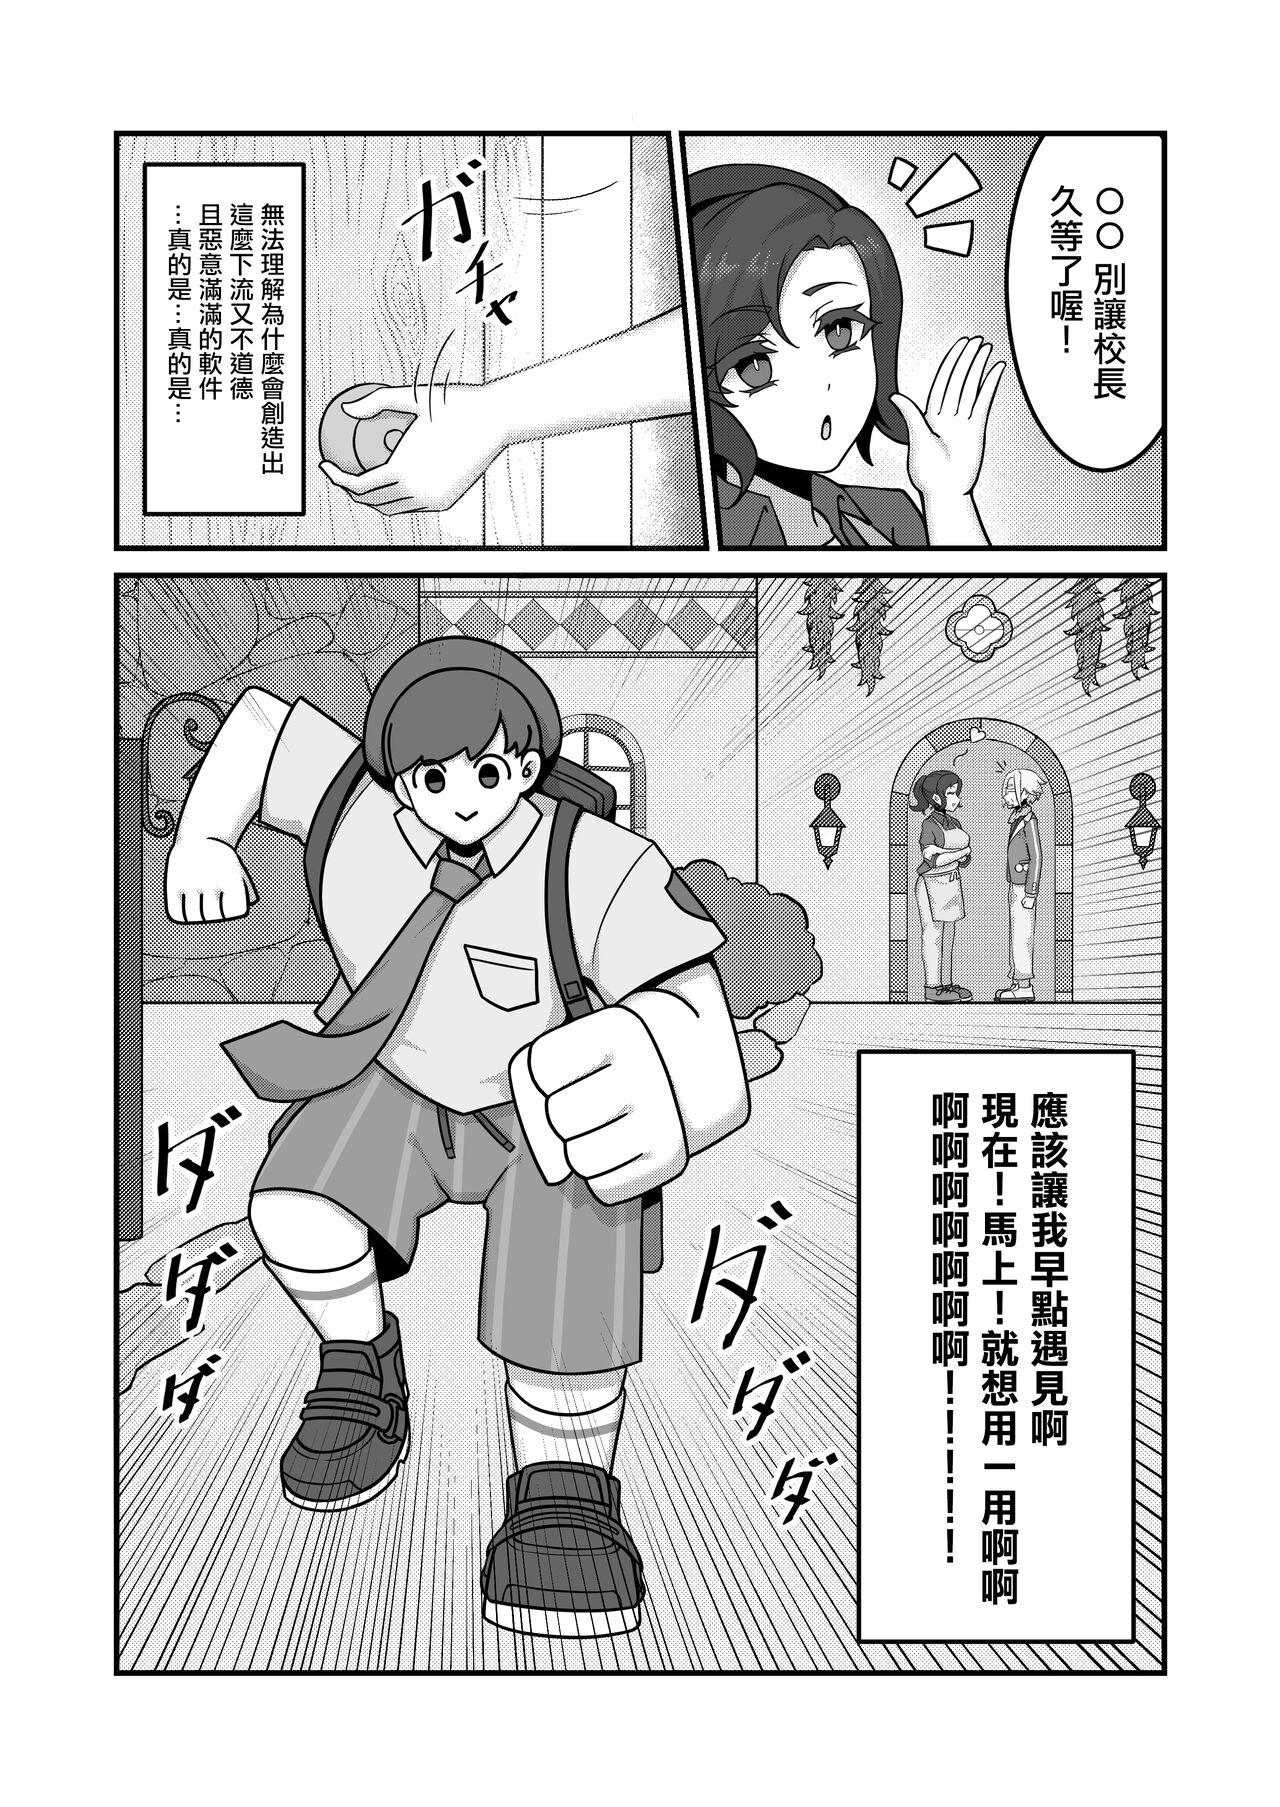 Female Domination [KuQ] Sex after Versus - Katy Hen 1 | Sex after Versus - 阿楓① [Chinese] - Pokemon | pocket monsters Amature Sex Tapes - Page 3